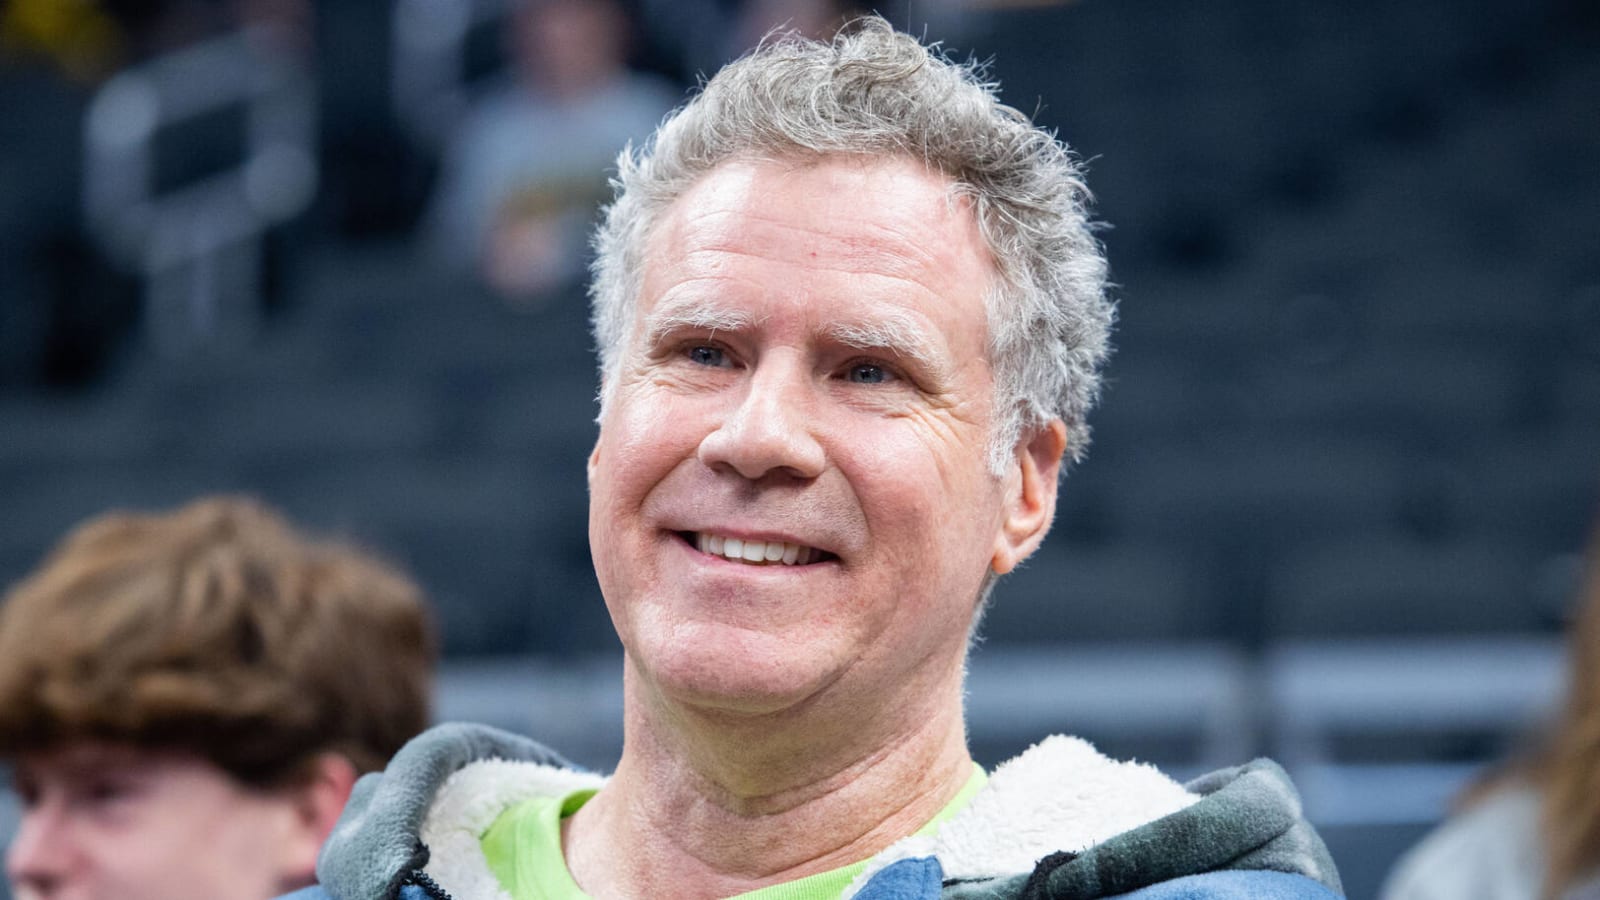 Ferrell could be on track to play John Madden in film